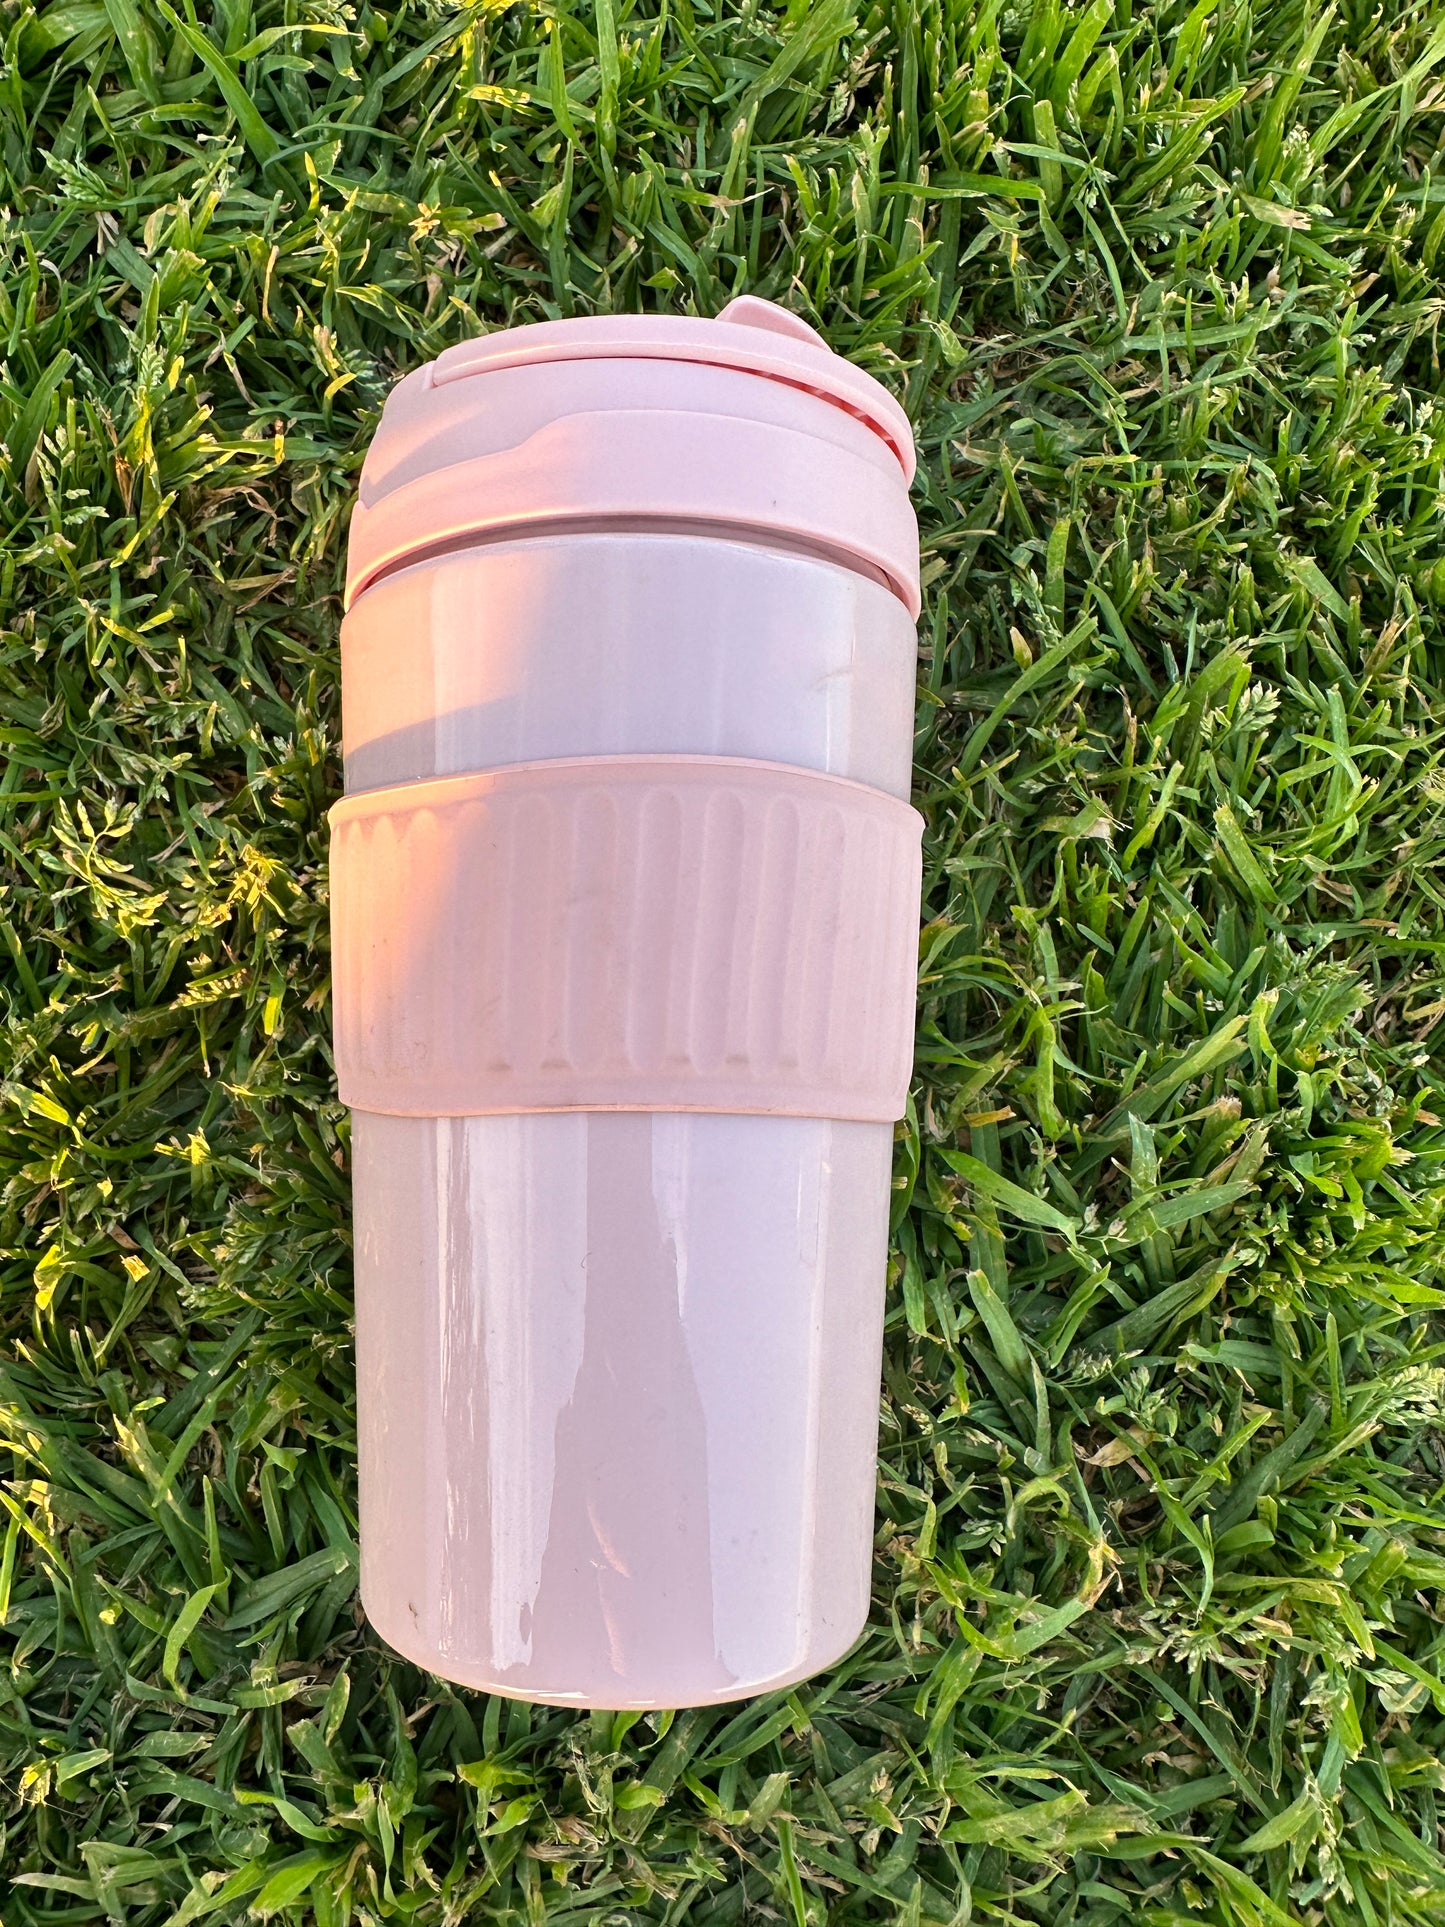 Rubber handle tumbler with straw